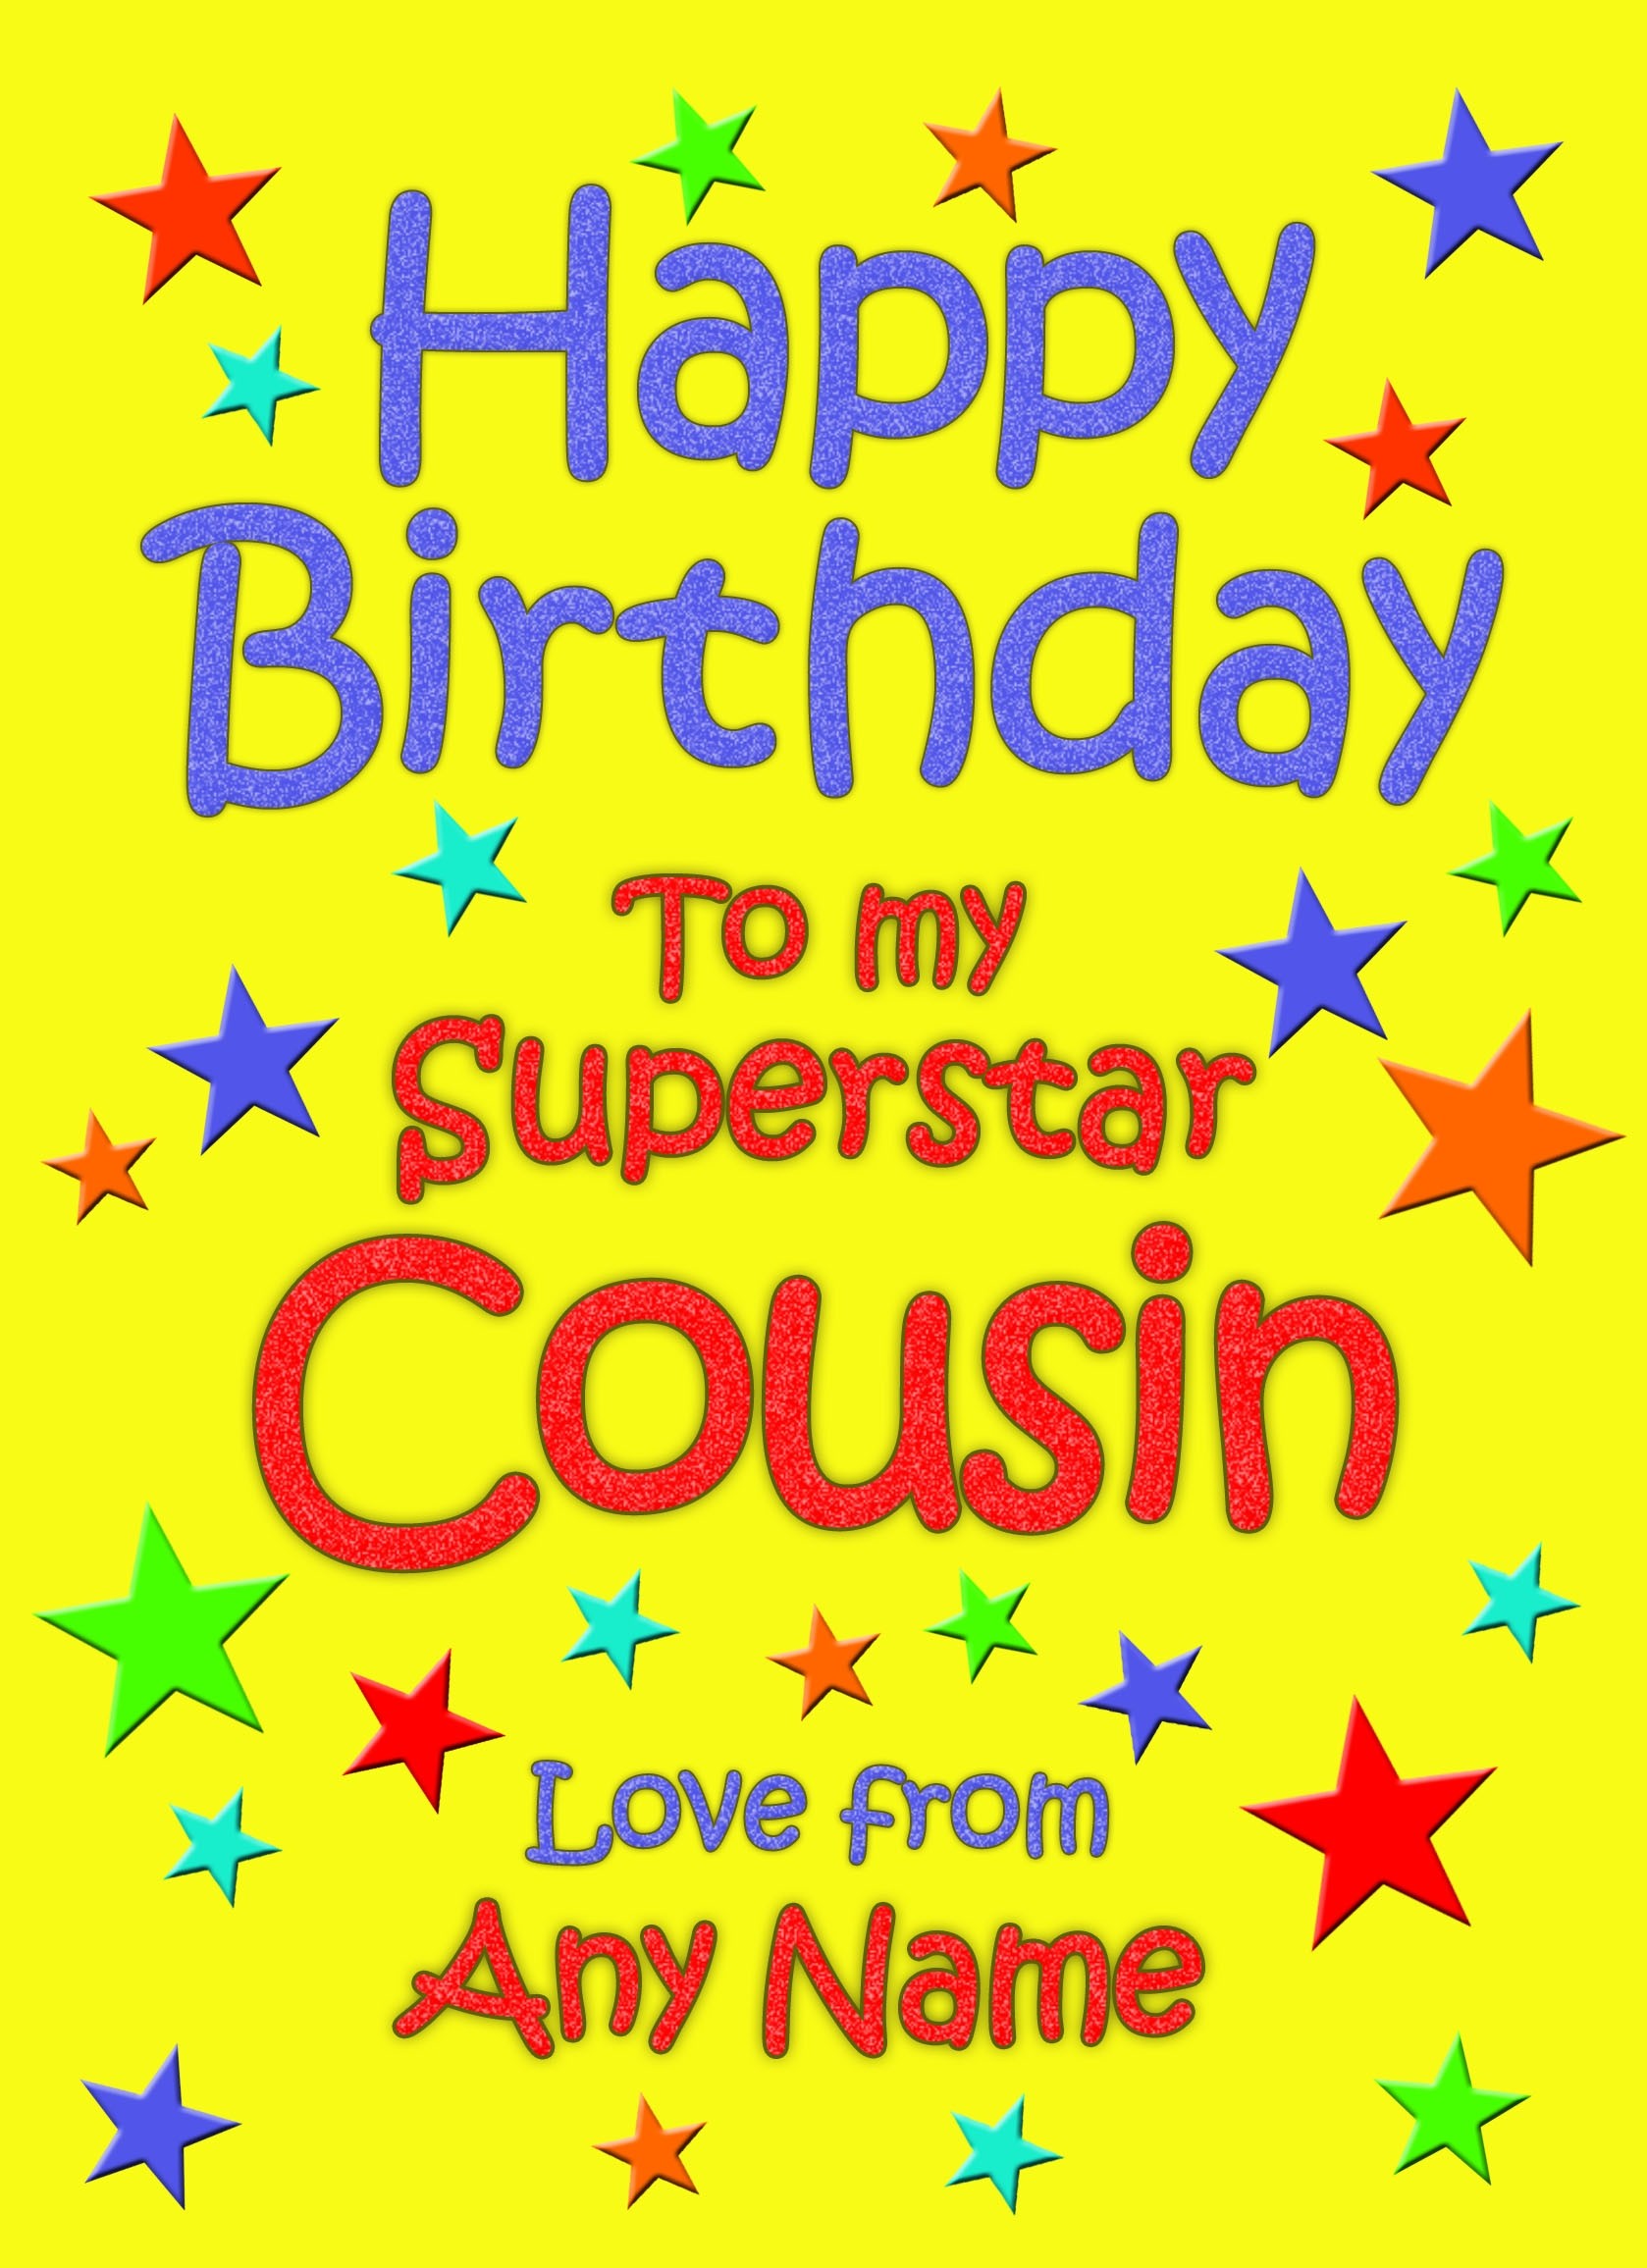 Personalised Cousin Birthday Card (Yellow)